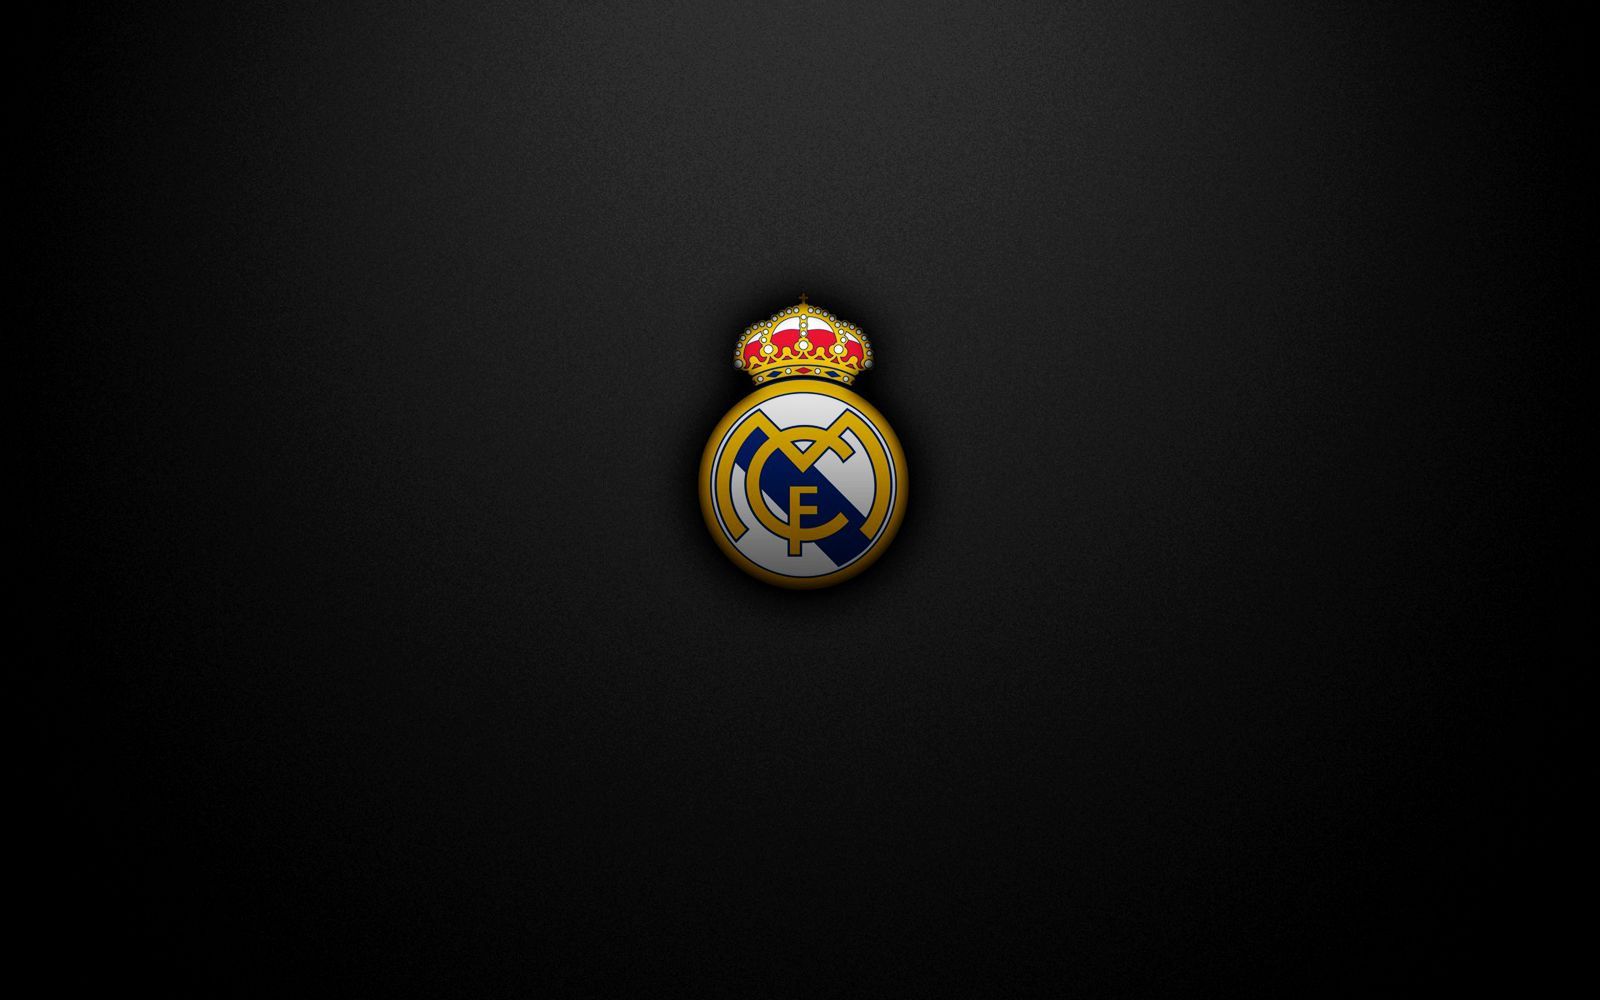 real-madrid-black-wallpaper-hd – Wallpapers, Backgrounds, Images ...